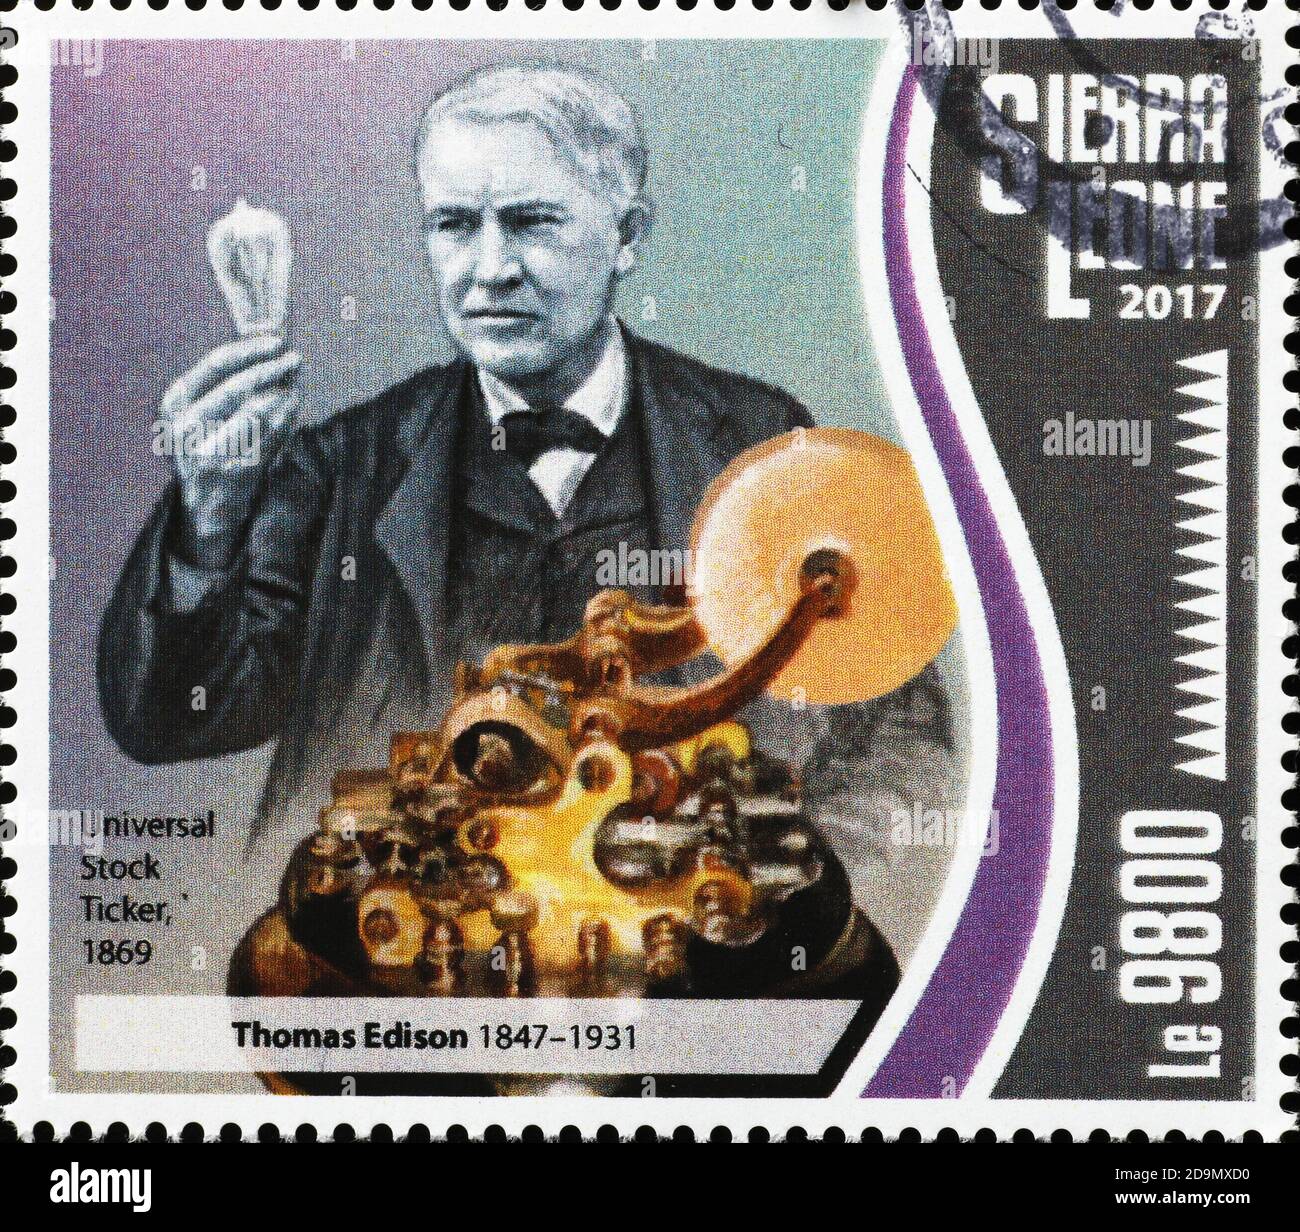 Universal stock ticker invention by thomas Edison on stamp Stock Photo